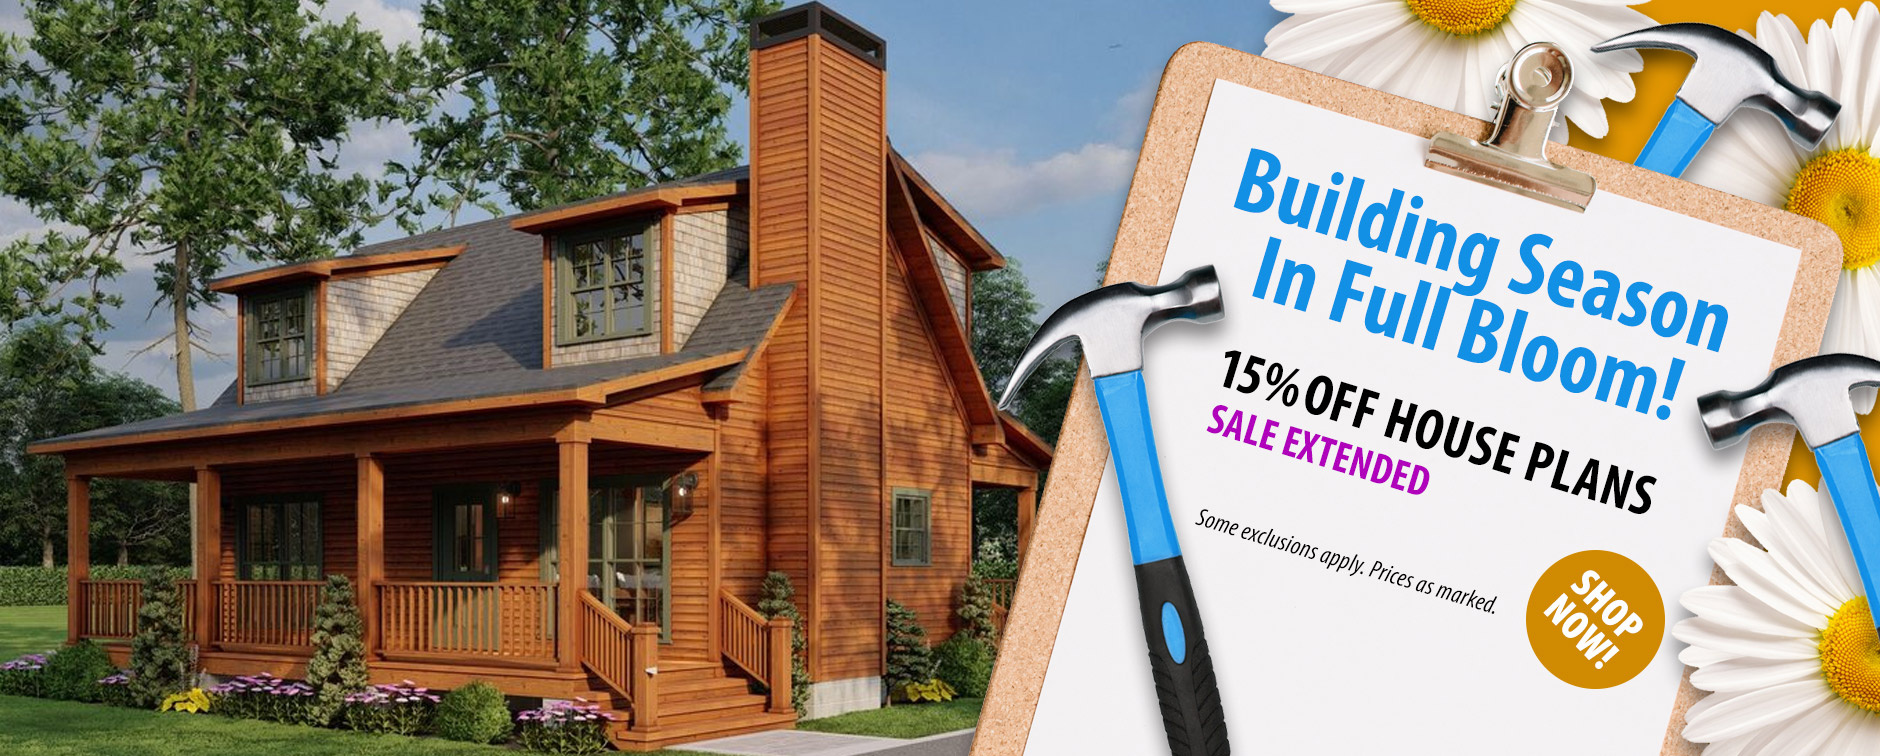 Get 15% Off Dream House Plans - Farmhouse, Modern, More - Event Extended